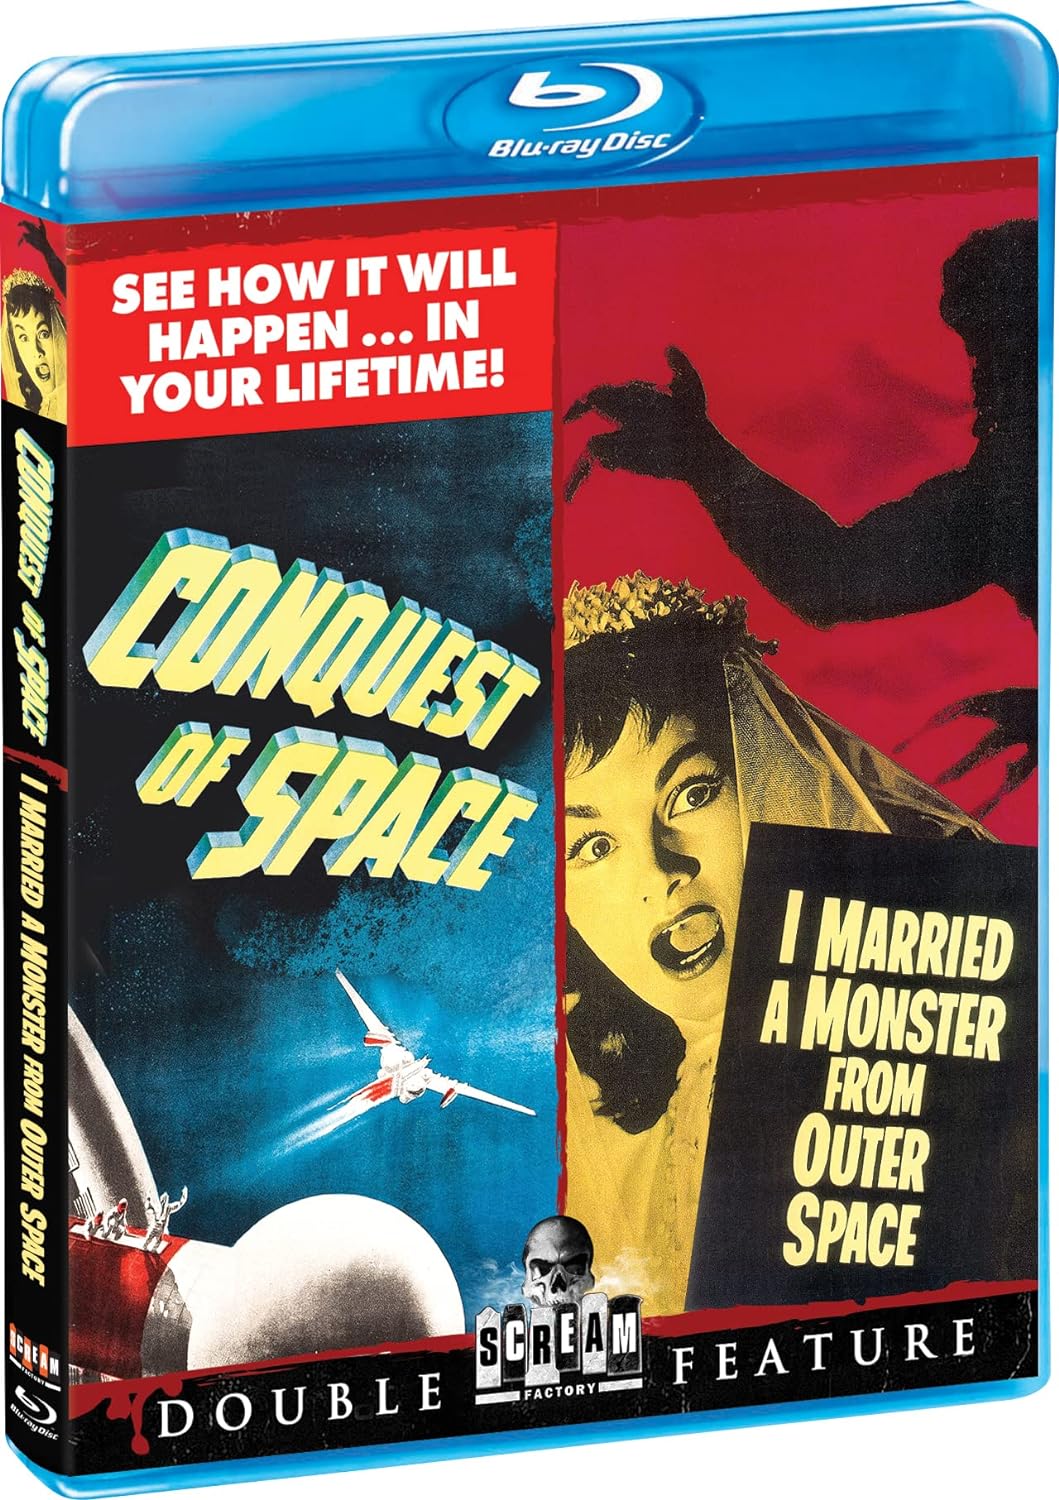 Conquest Of Space / I Married a Monster from Outer Space [Double Feature] (Scream Factory)